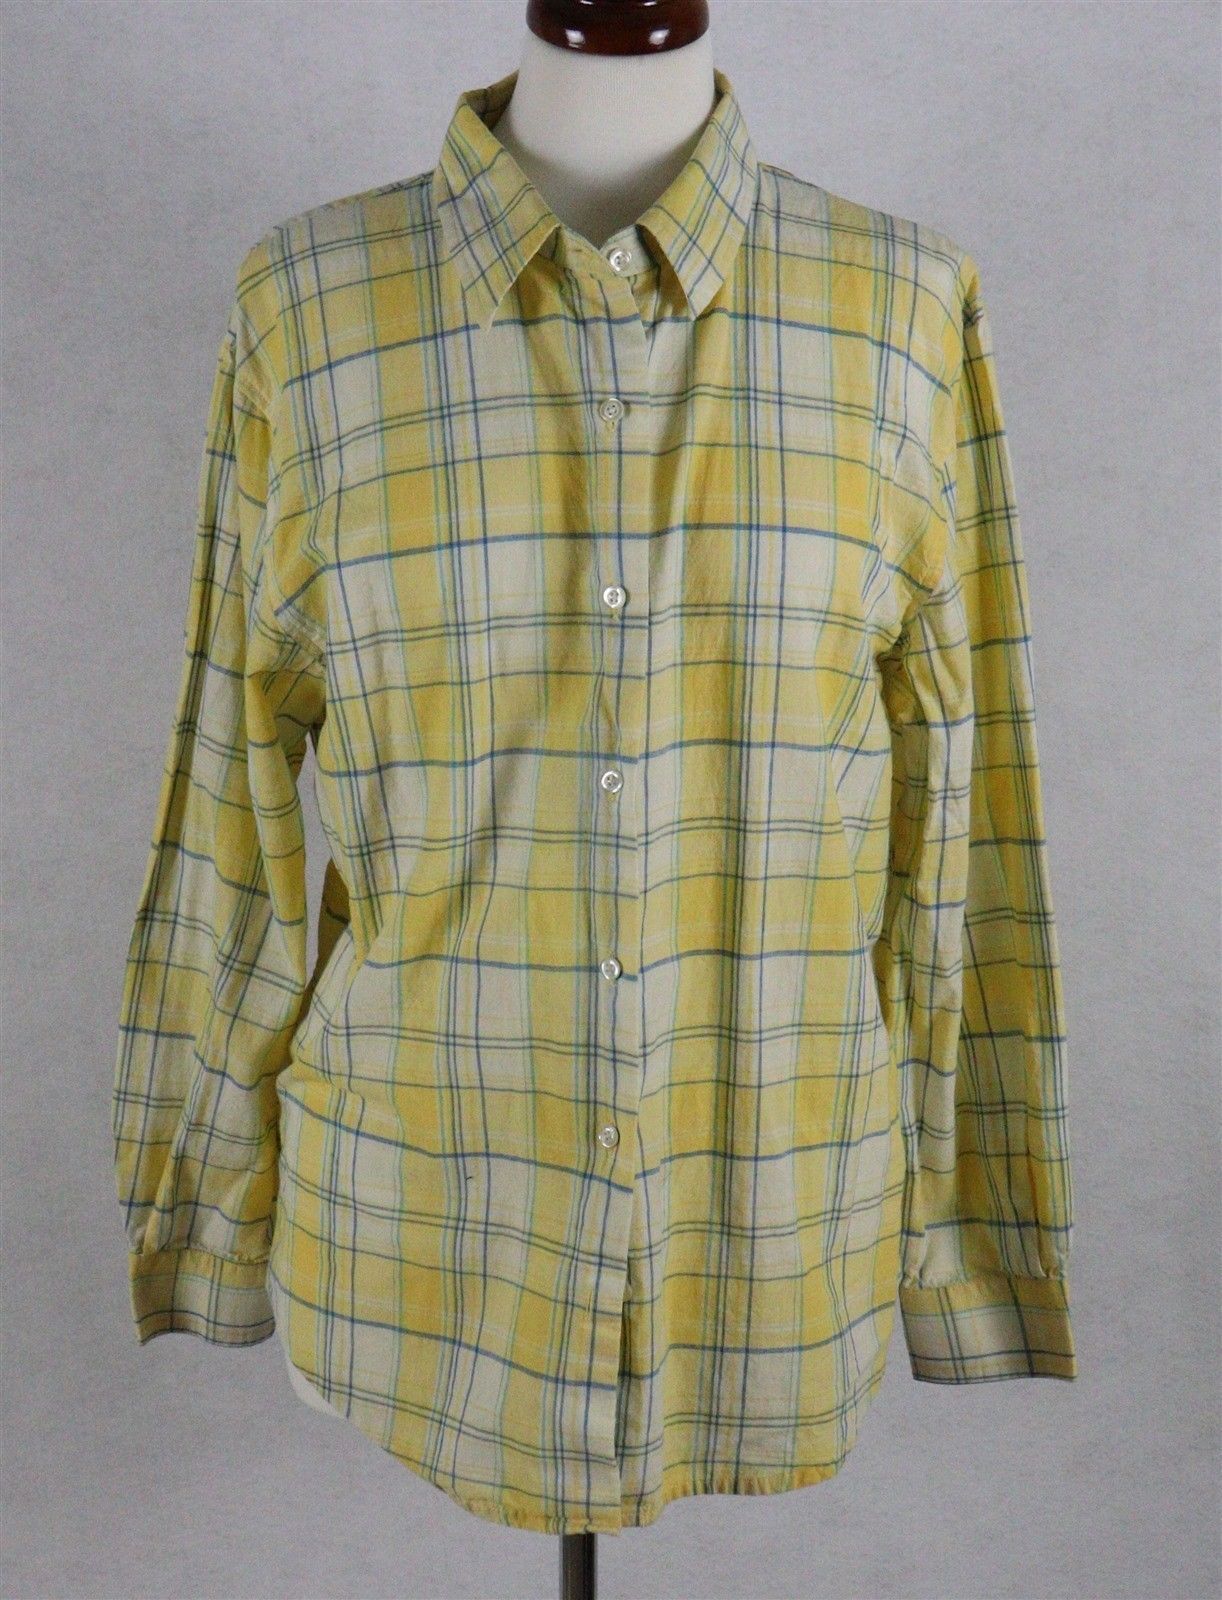 Appleseeds Womens Long Sleeve Yellow Plaid Blouse Size Large - Tops ...